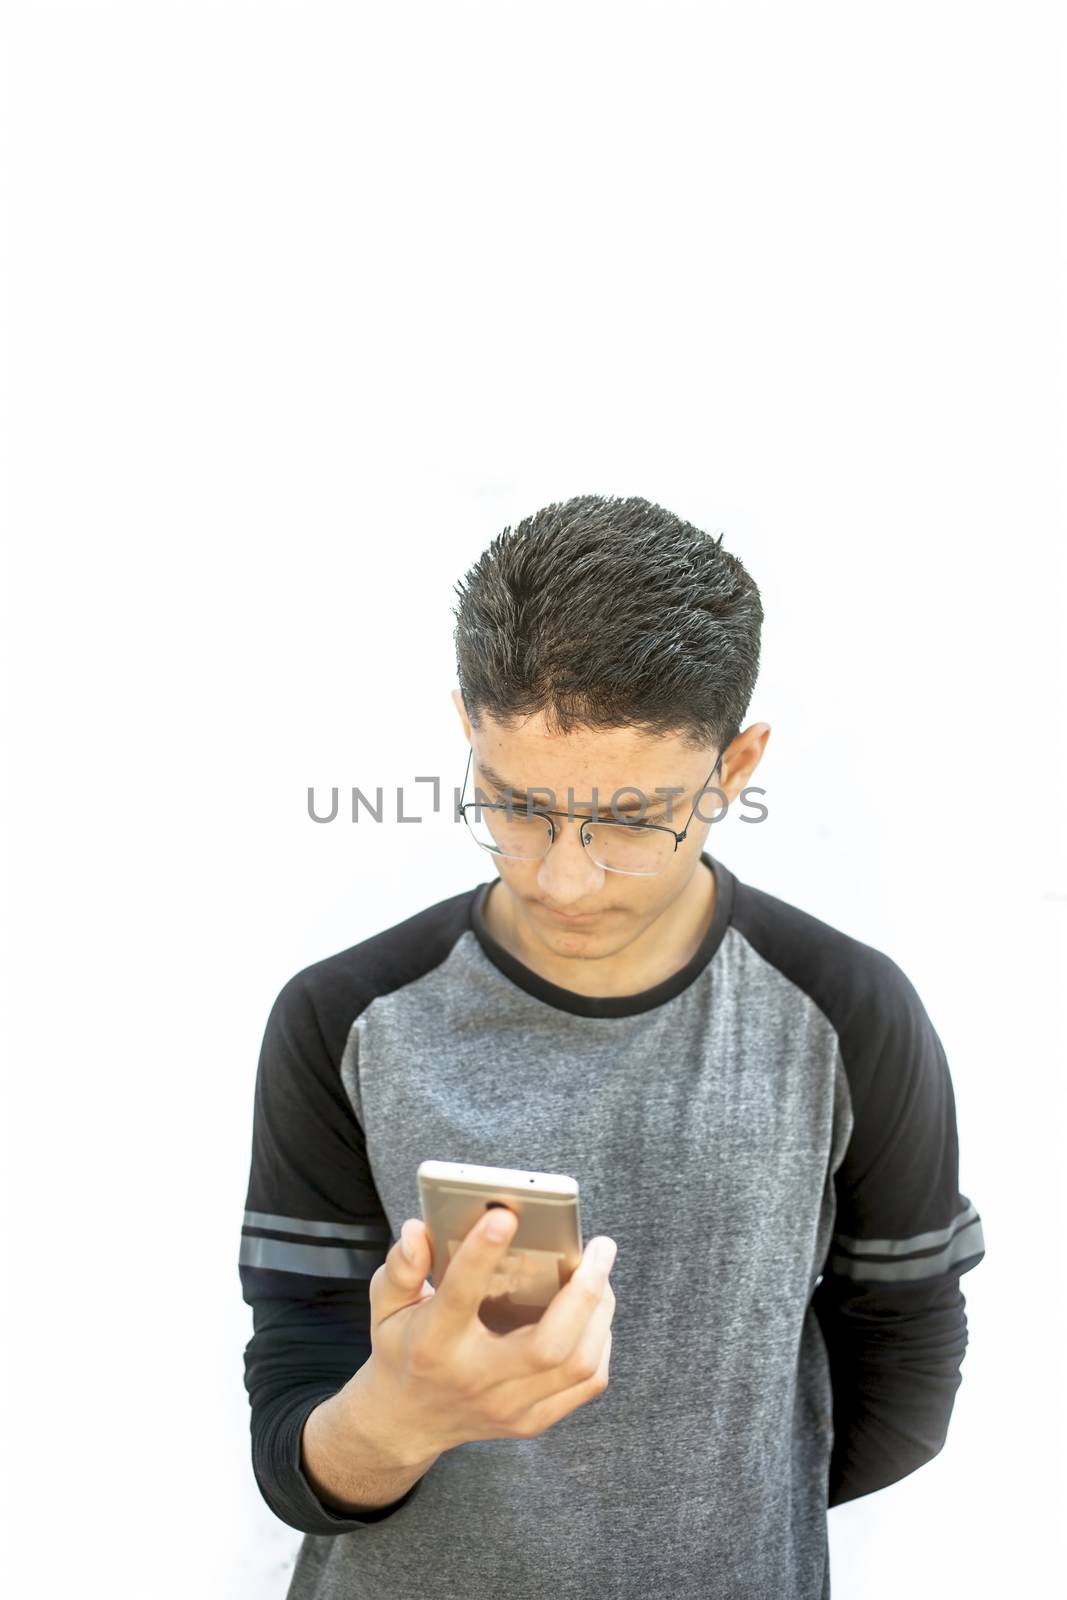 Portrait shot of young teenager wearing black colored t-shirt and using cell phone and posing or expressing various expressions on his face isolated on white.